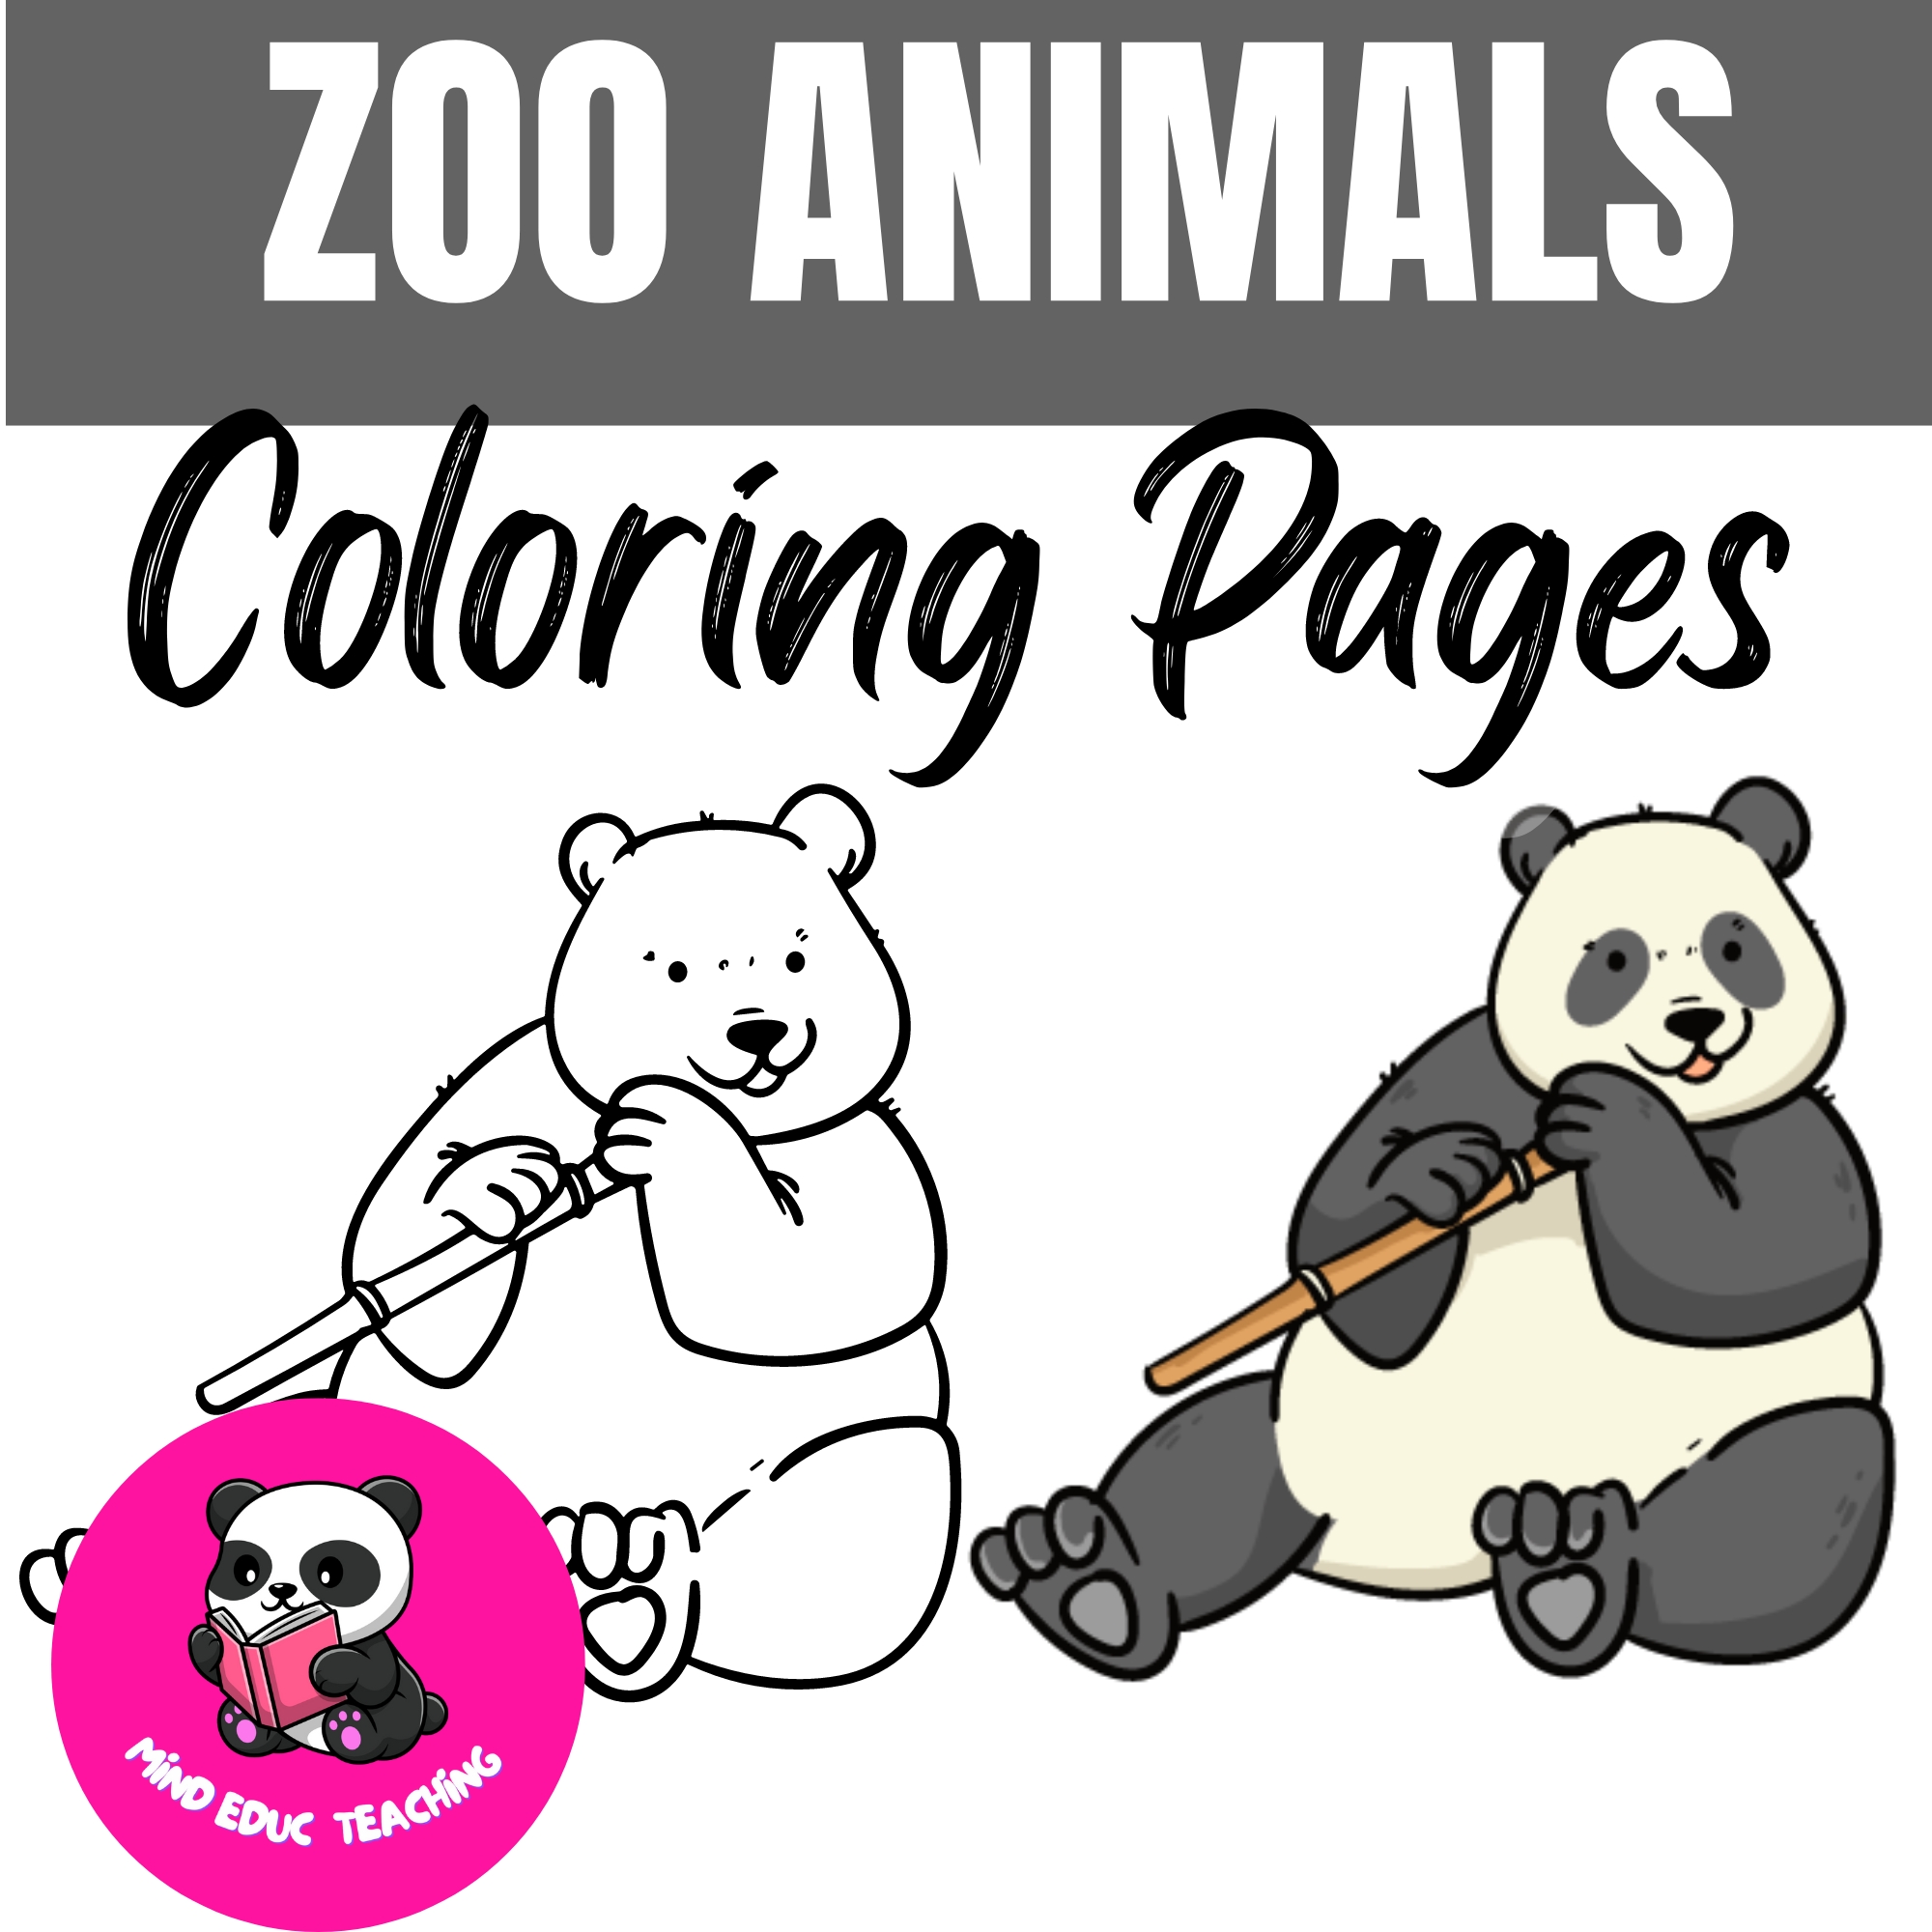 Zoo animals coloring pages made by teachers